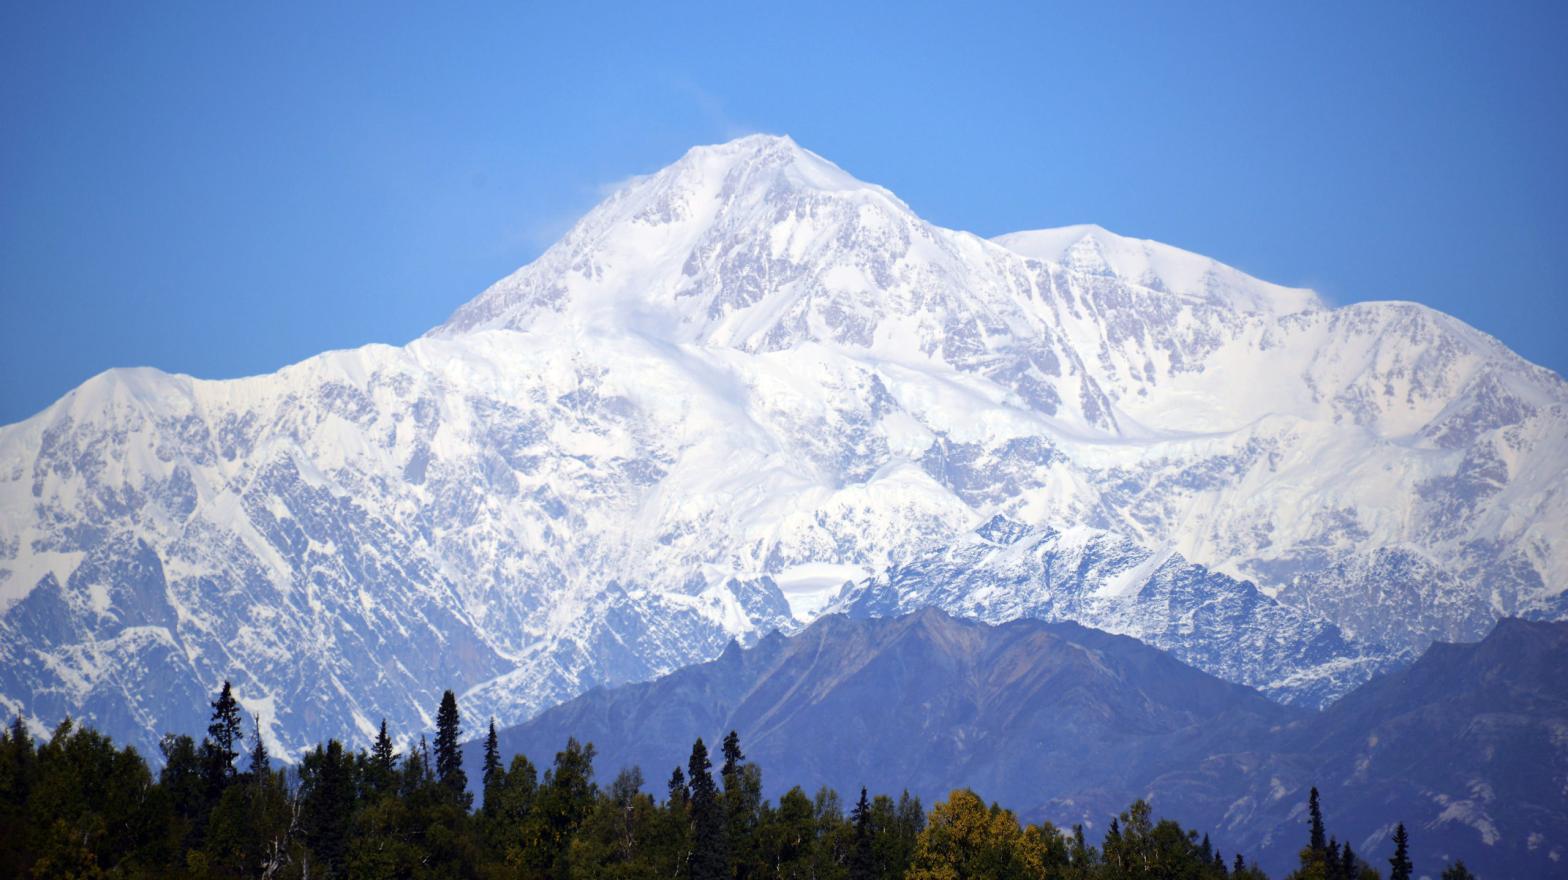 A view of Denali, formerly known as Mt. McKinley. (Photo: Lance King, Getty Images)